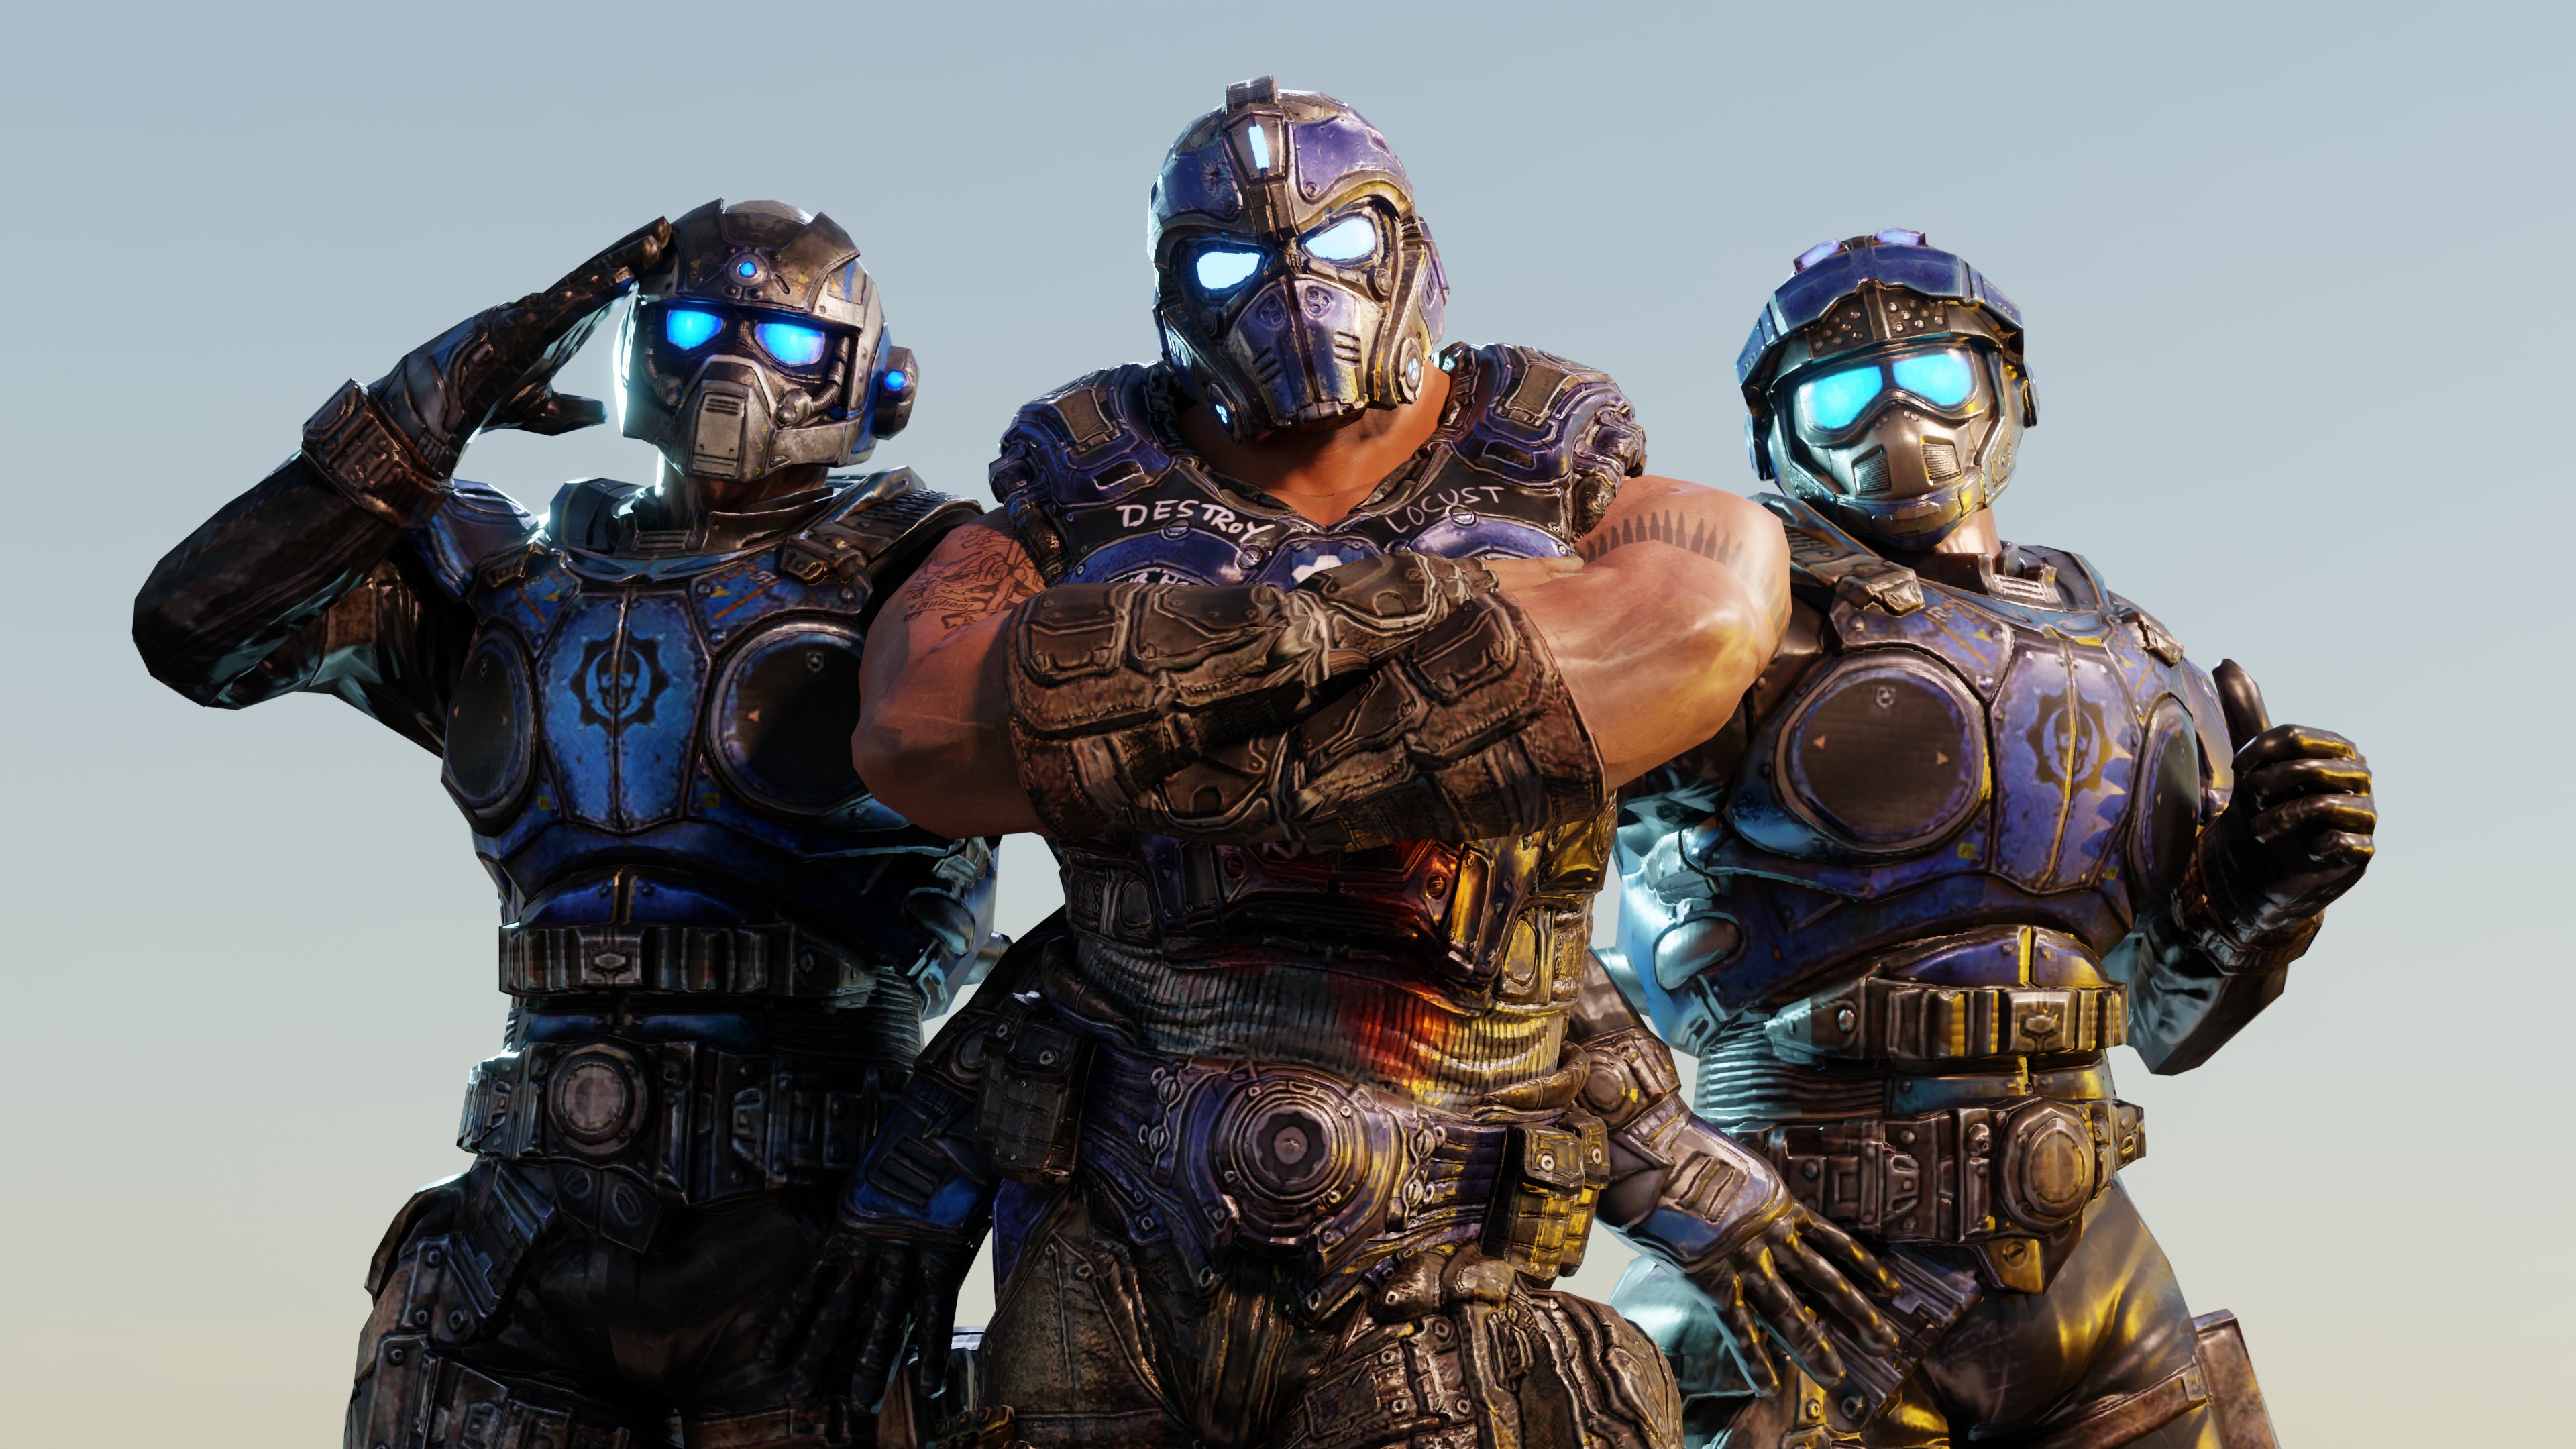 RuV {Commission closed} Brothers #Gearsofwar #Gears #Epicgames #Thecolation #COG #AnthonyCarmine #BenjaminCarmine #ClaytonCarmine #Carmine d #fanart #Blender3D #cycle #render